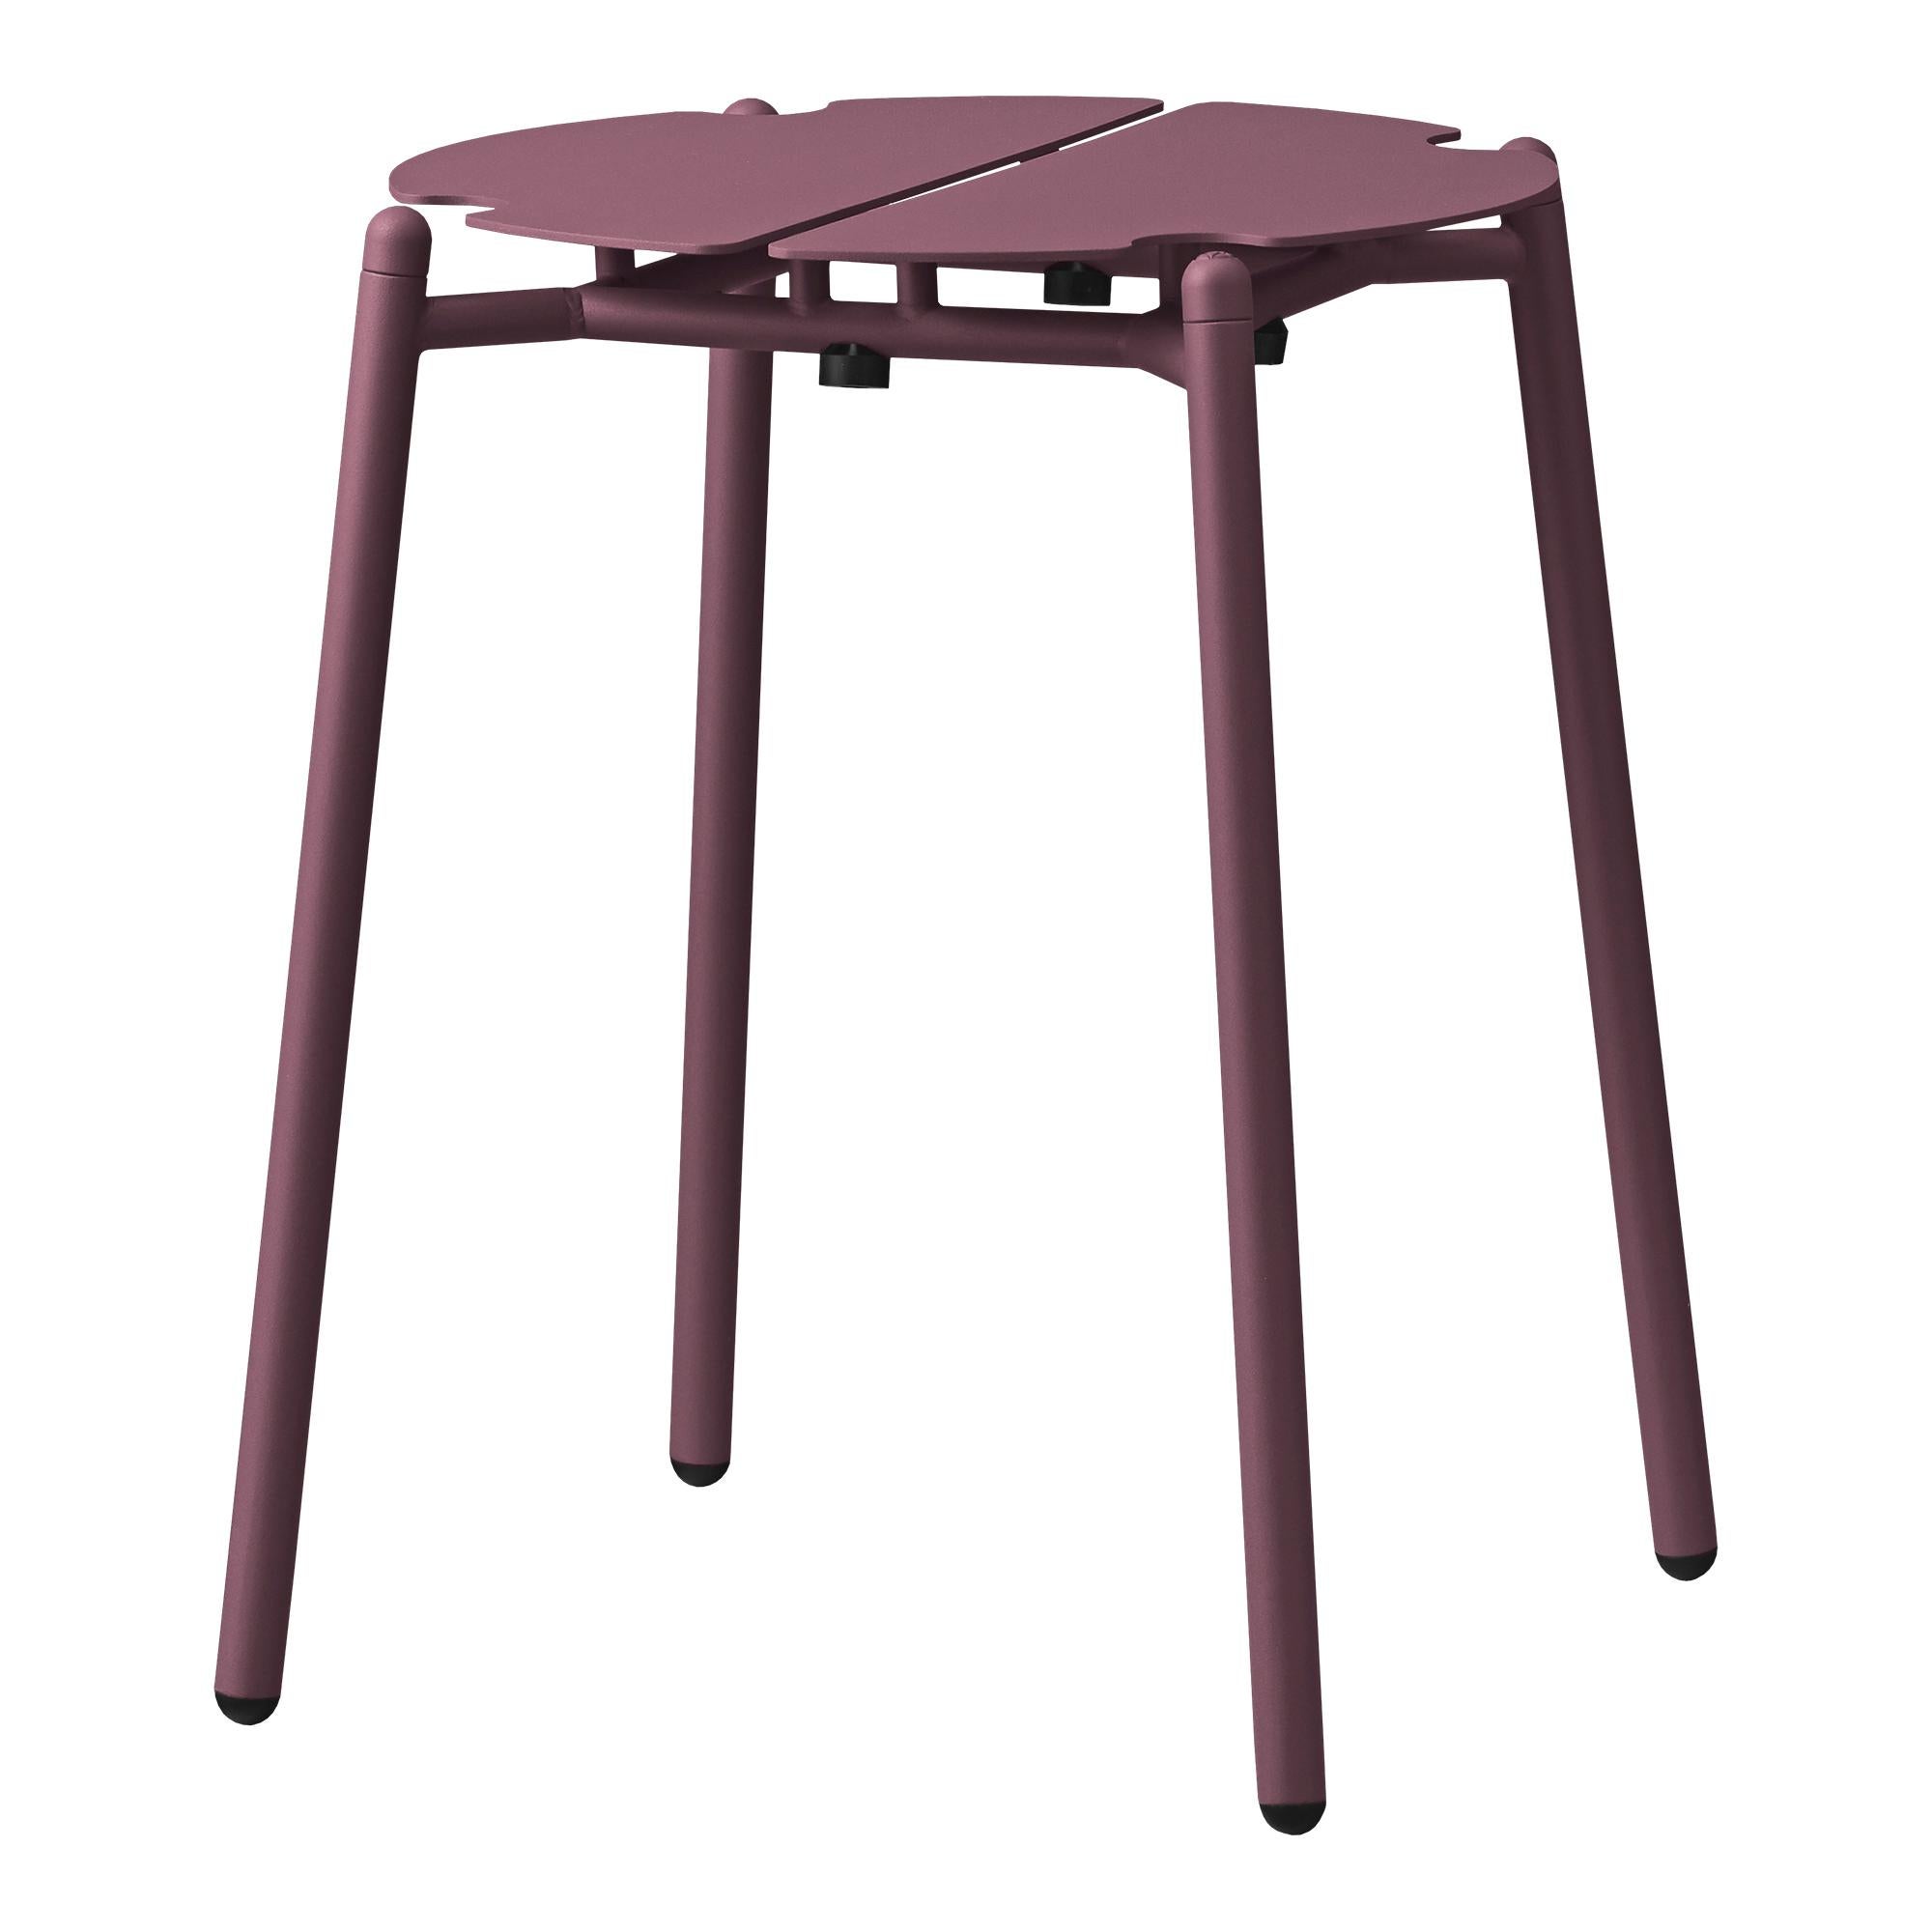 Bordeaux minimalist stool 
Dimensions: Diameter 35 x H 45 cm 
Materials: Steel w. Matte Powder Coating & Aluminum w. Matte Powder Coating.
Available in colors: Taupe, Bordeaux, Forest, Ginger Bread, Black and, Black and Gold. 


The NOVO